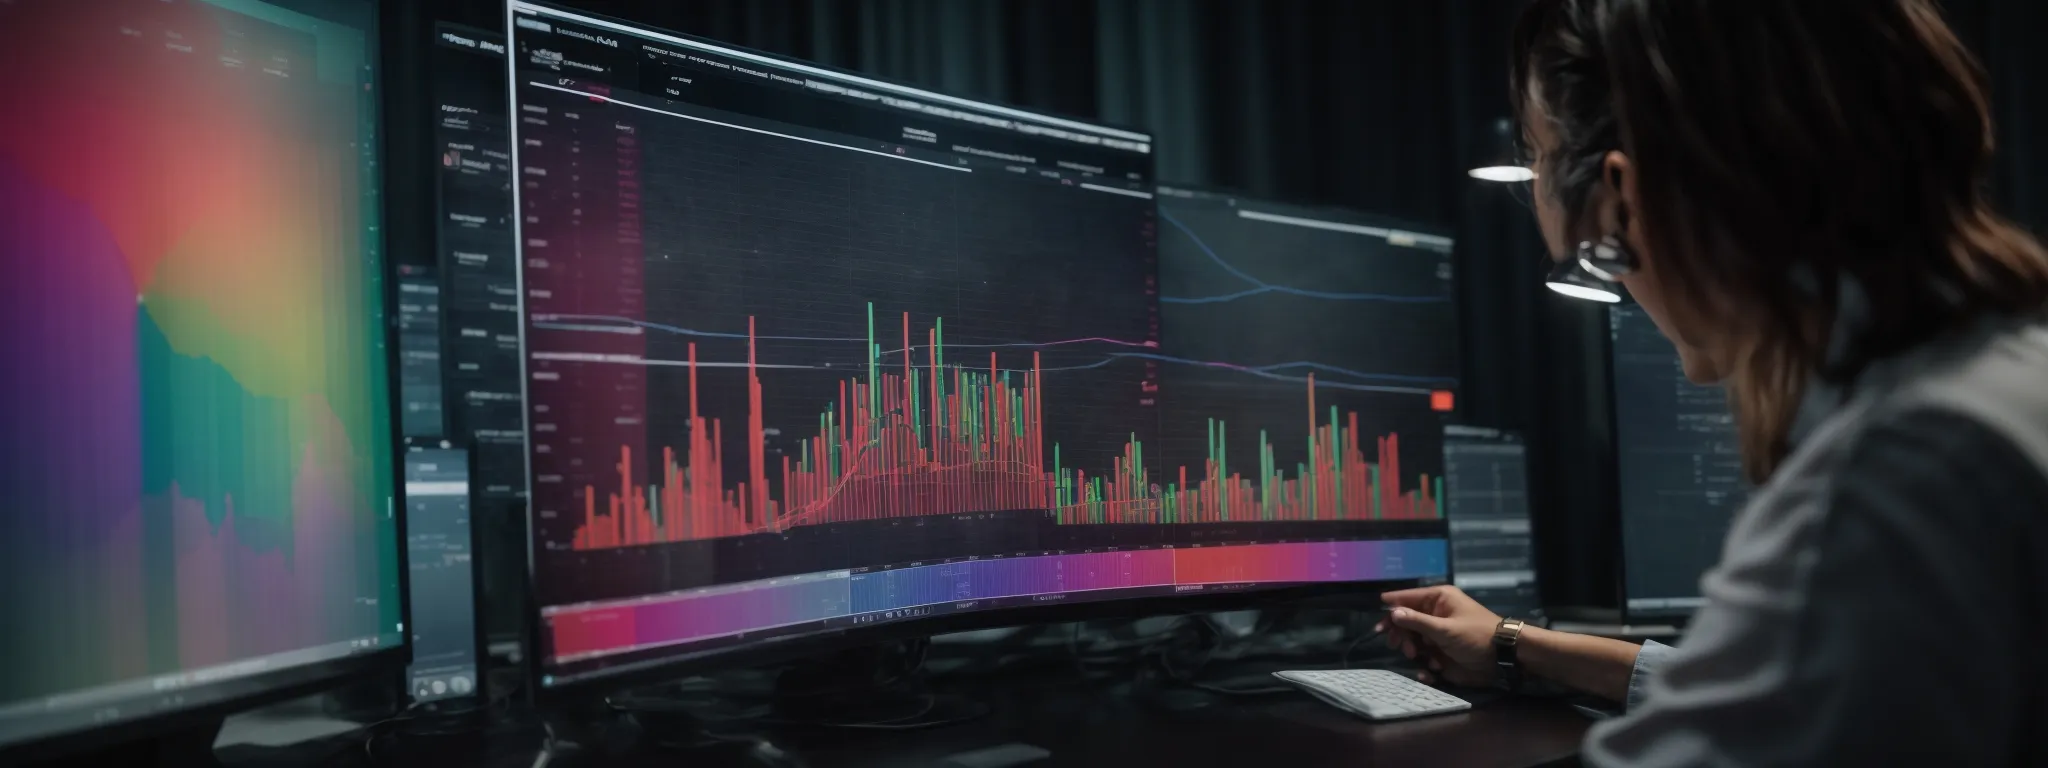 a marketer is reviewing a colorful data dashboard on a computer screen, studying graphs and trend lines that represent search keyword performance.